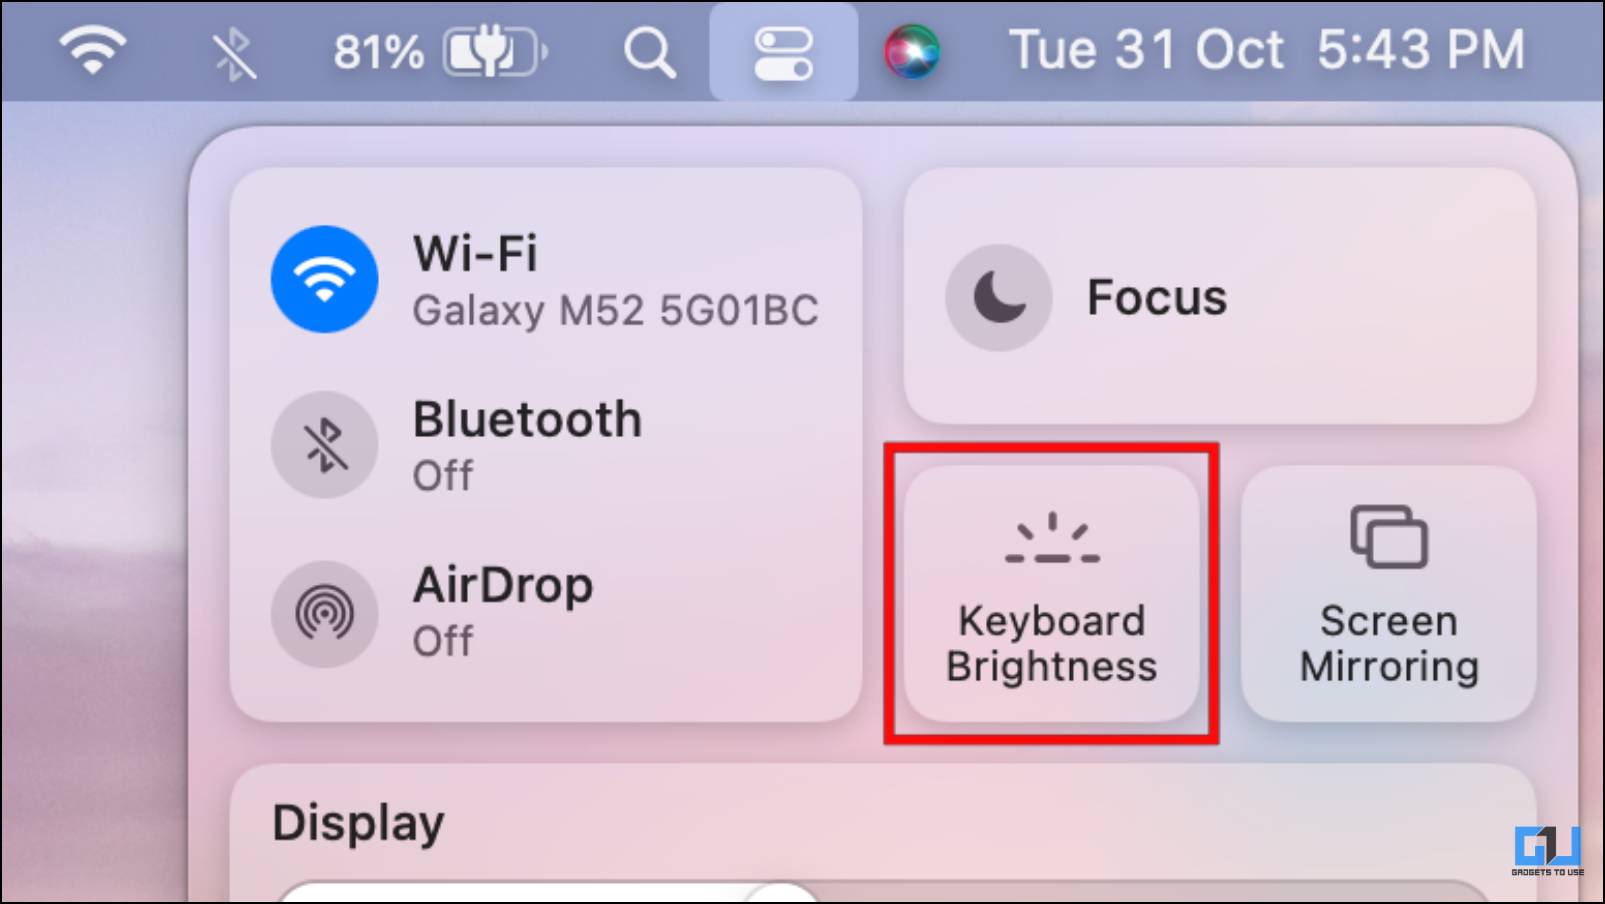 Click on the Keyboard Brightness Toggle in the Control Center